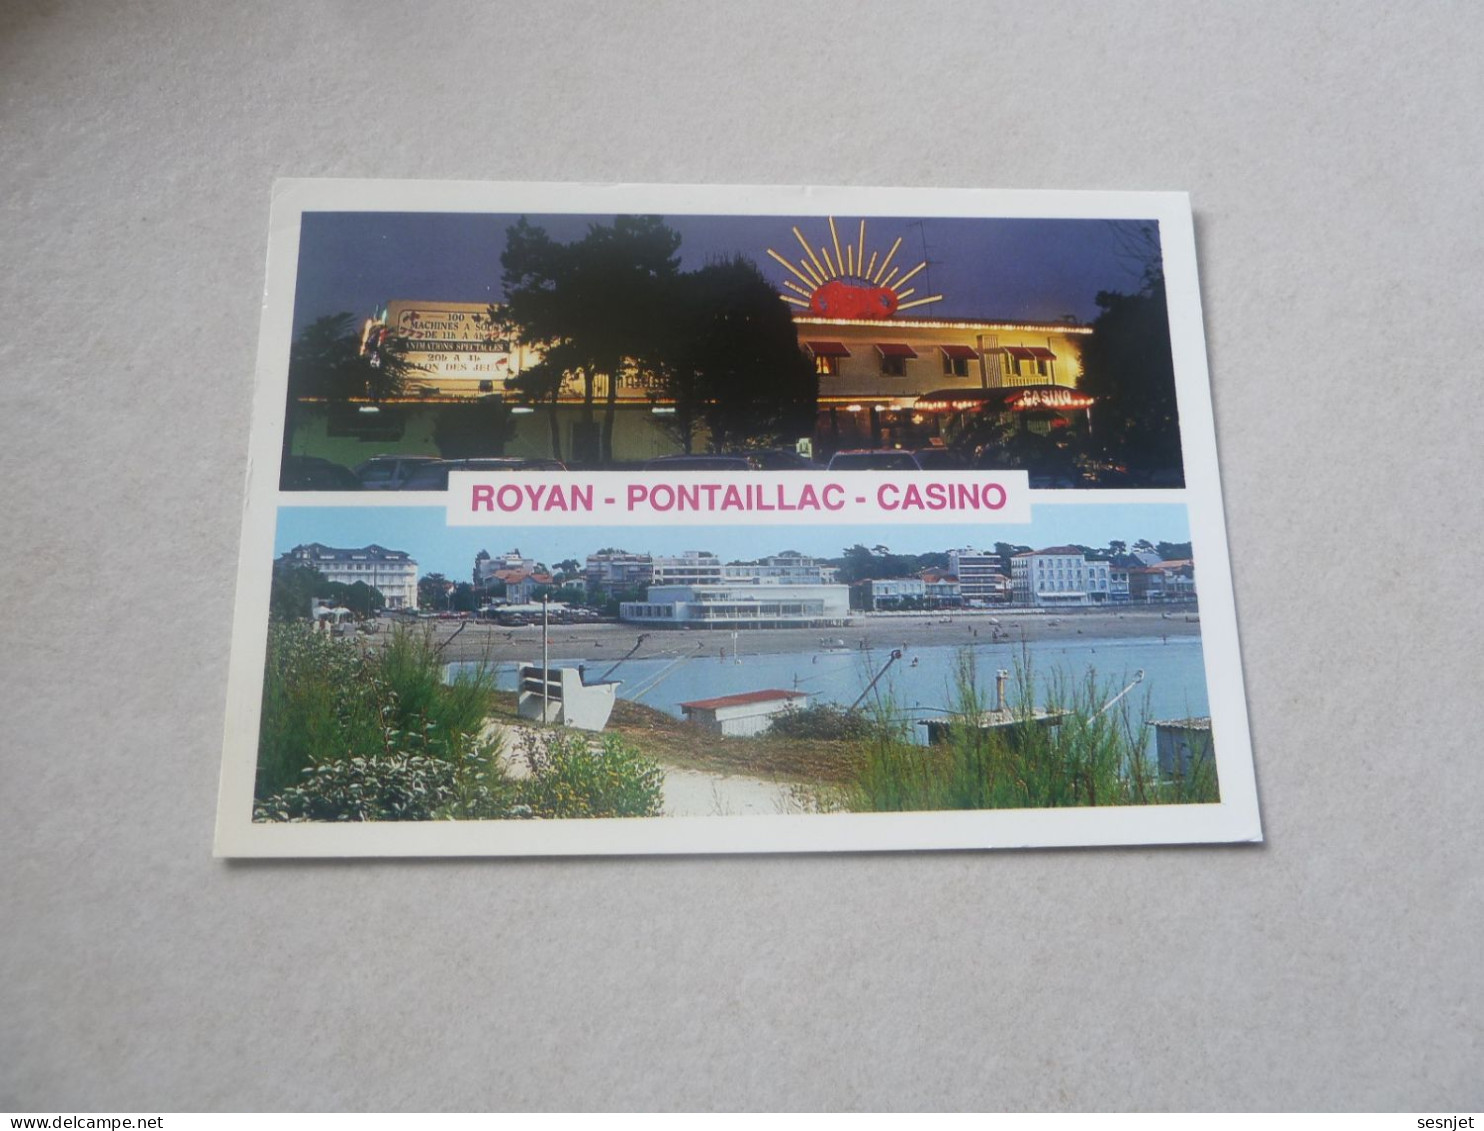 Royan - Pontaillac - Multi-vues - Yt 2820 - Editions Marcou - Année 1993 - - Casino